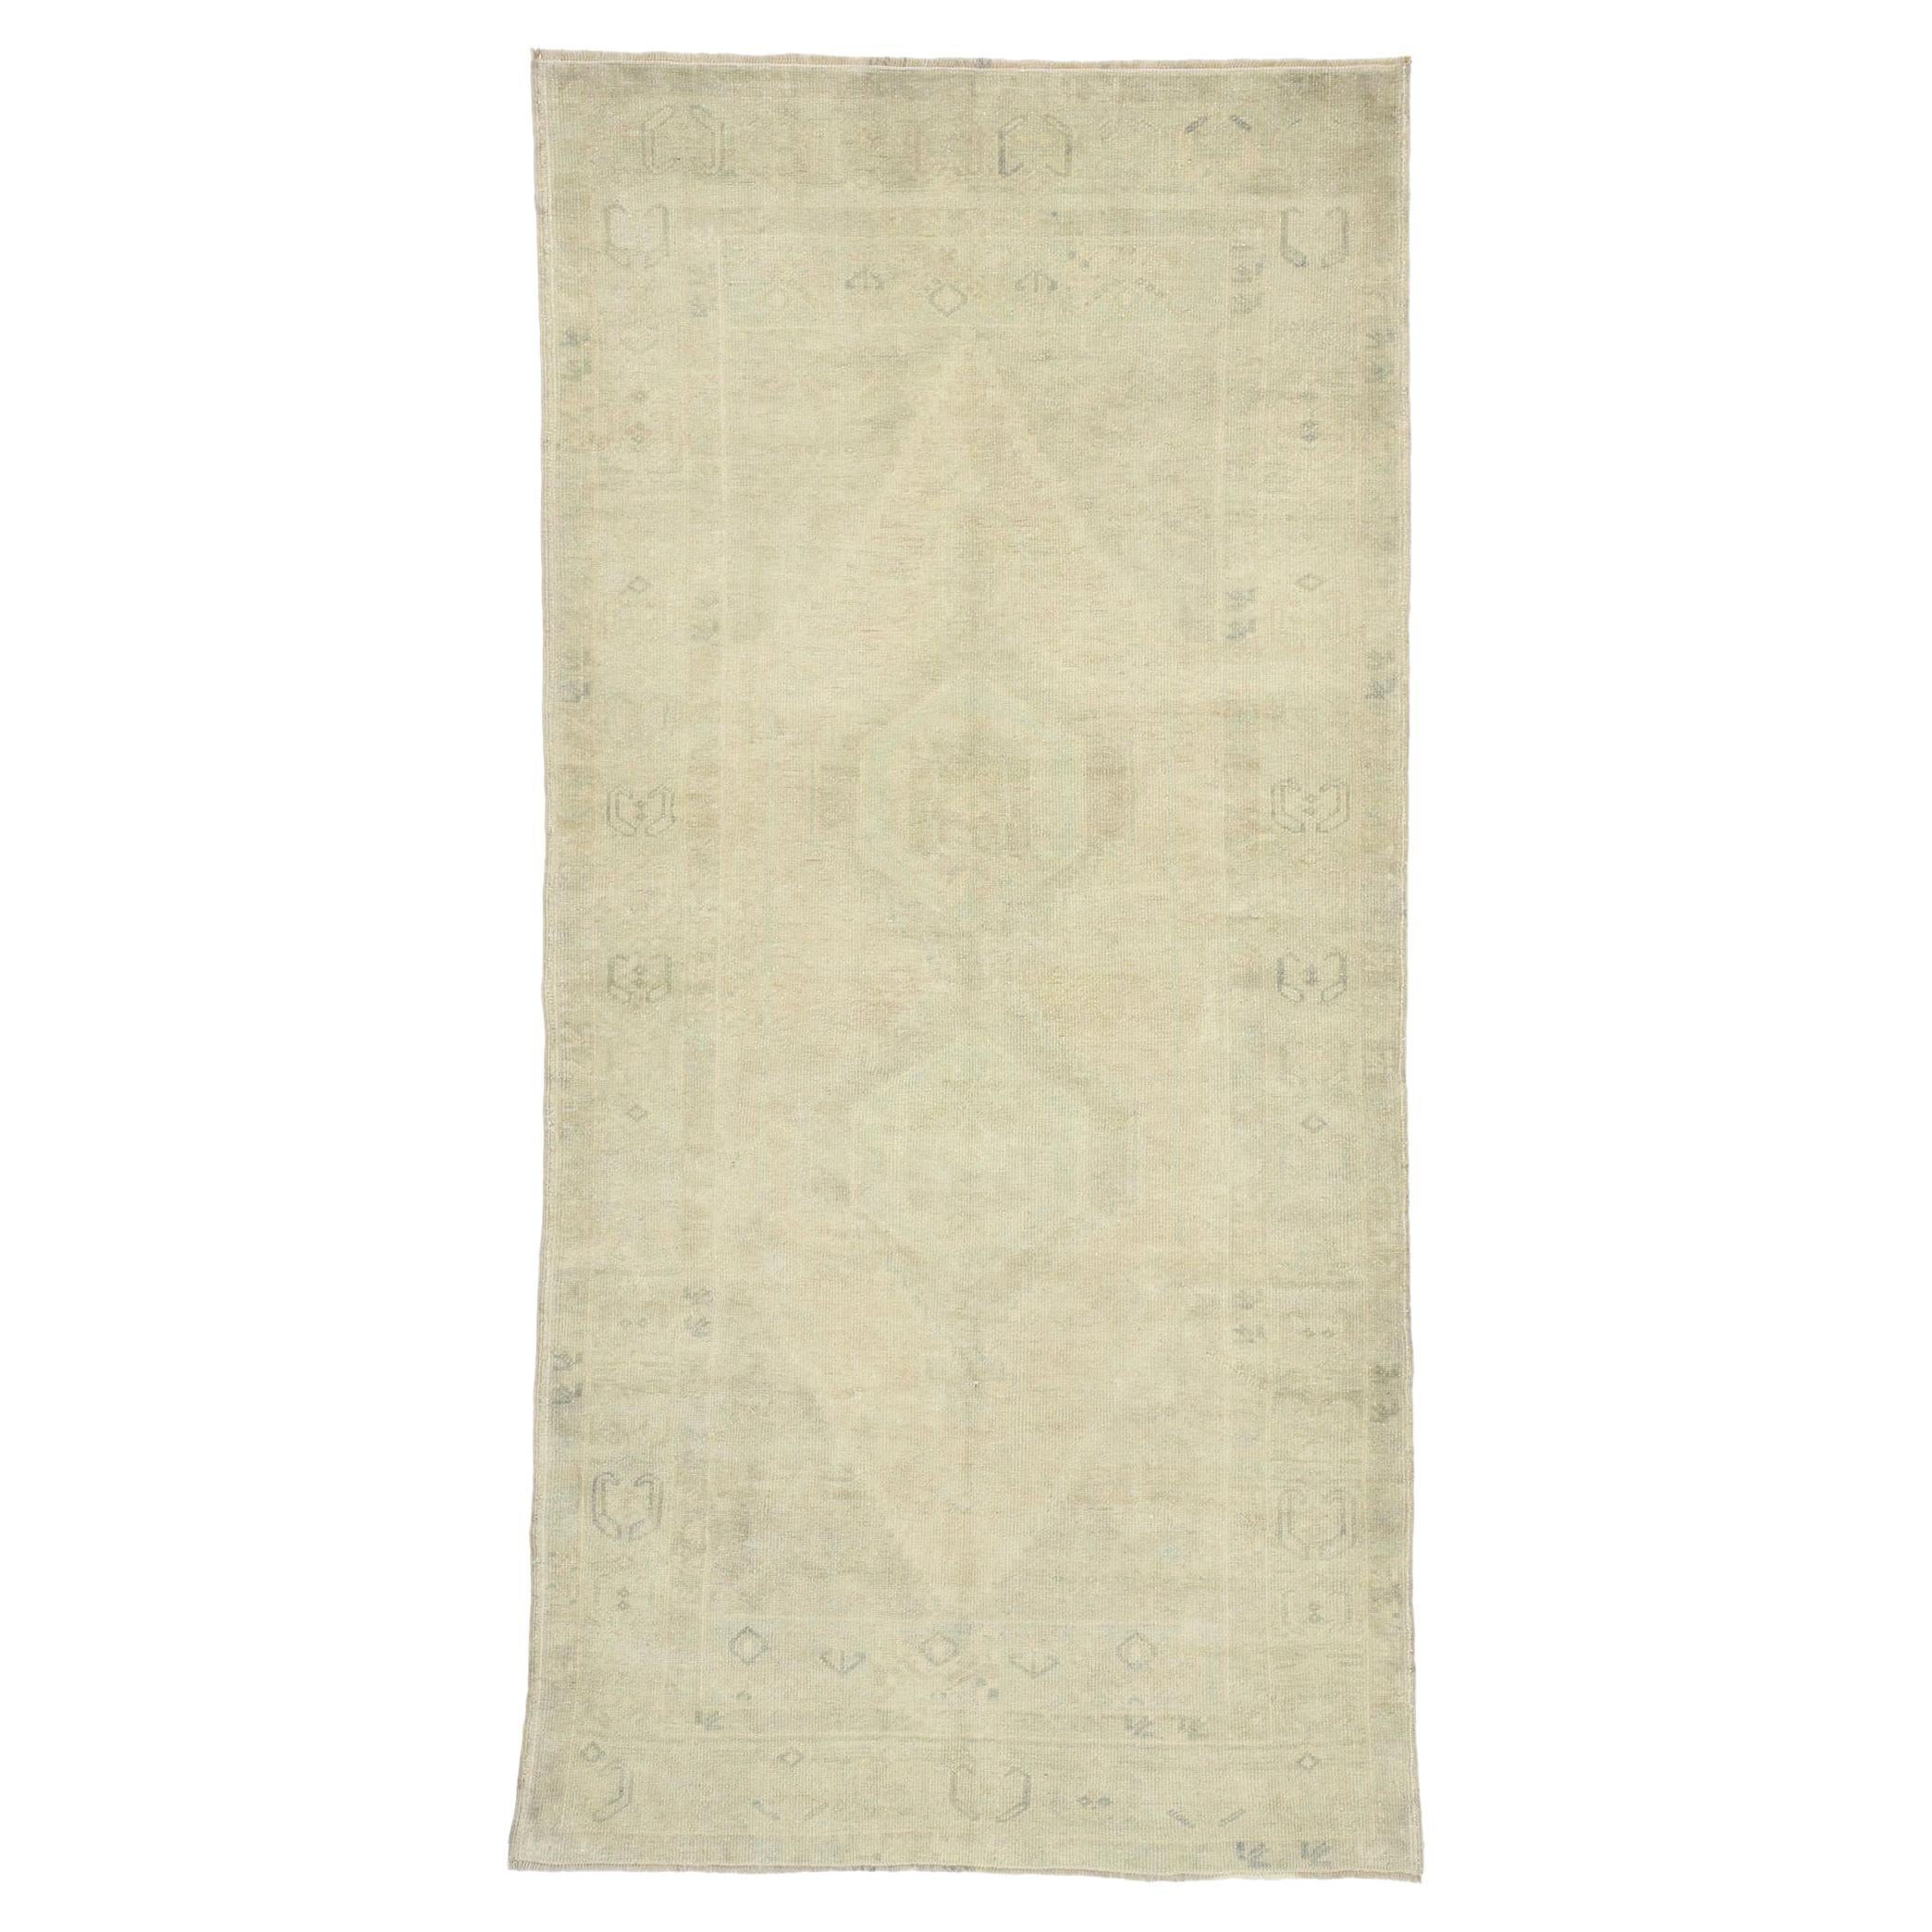 Vintage Turkish Oushak Rug, Calm Cohesion Meets Easygoing Elegance For Sale